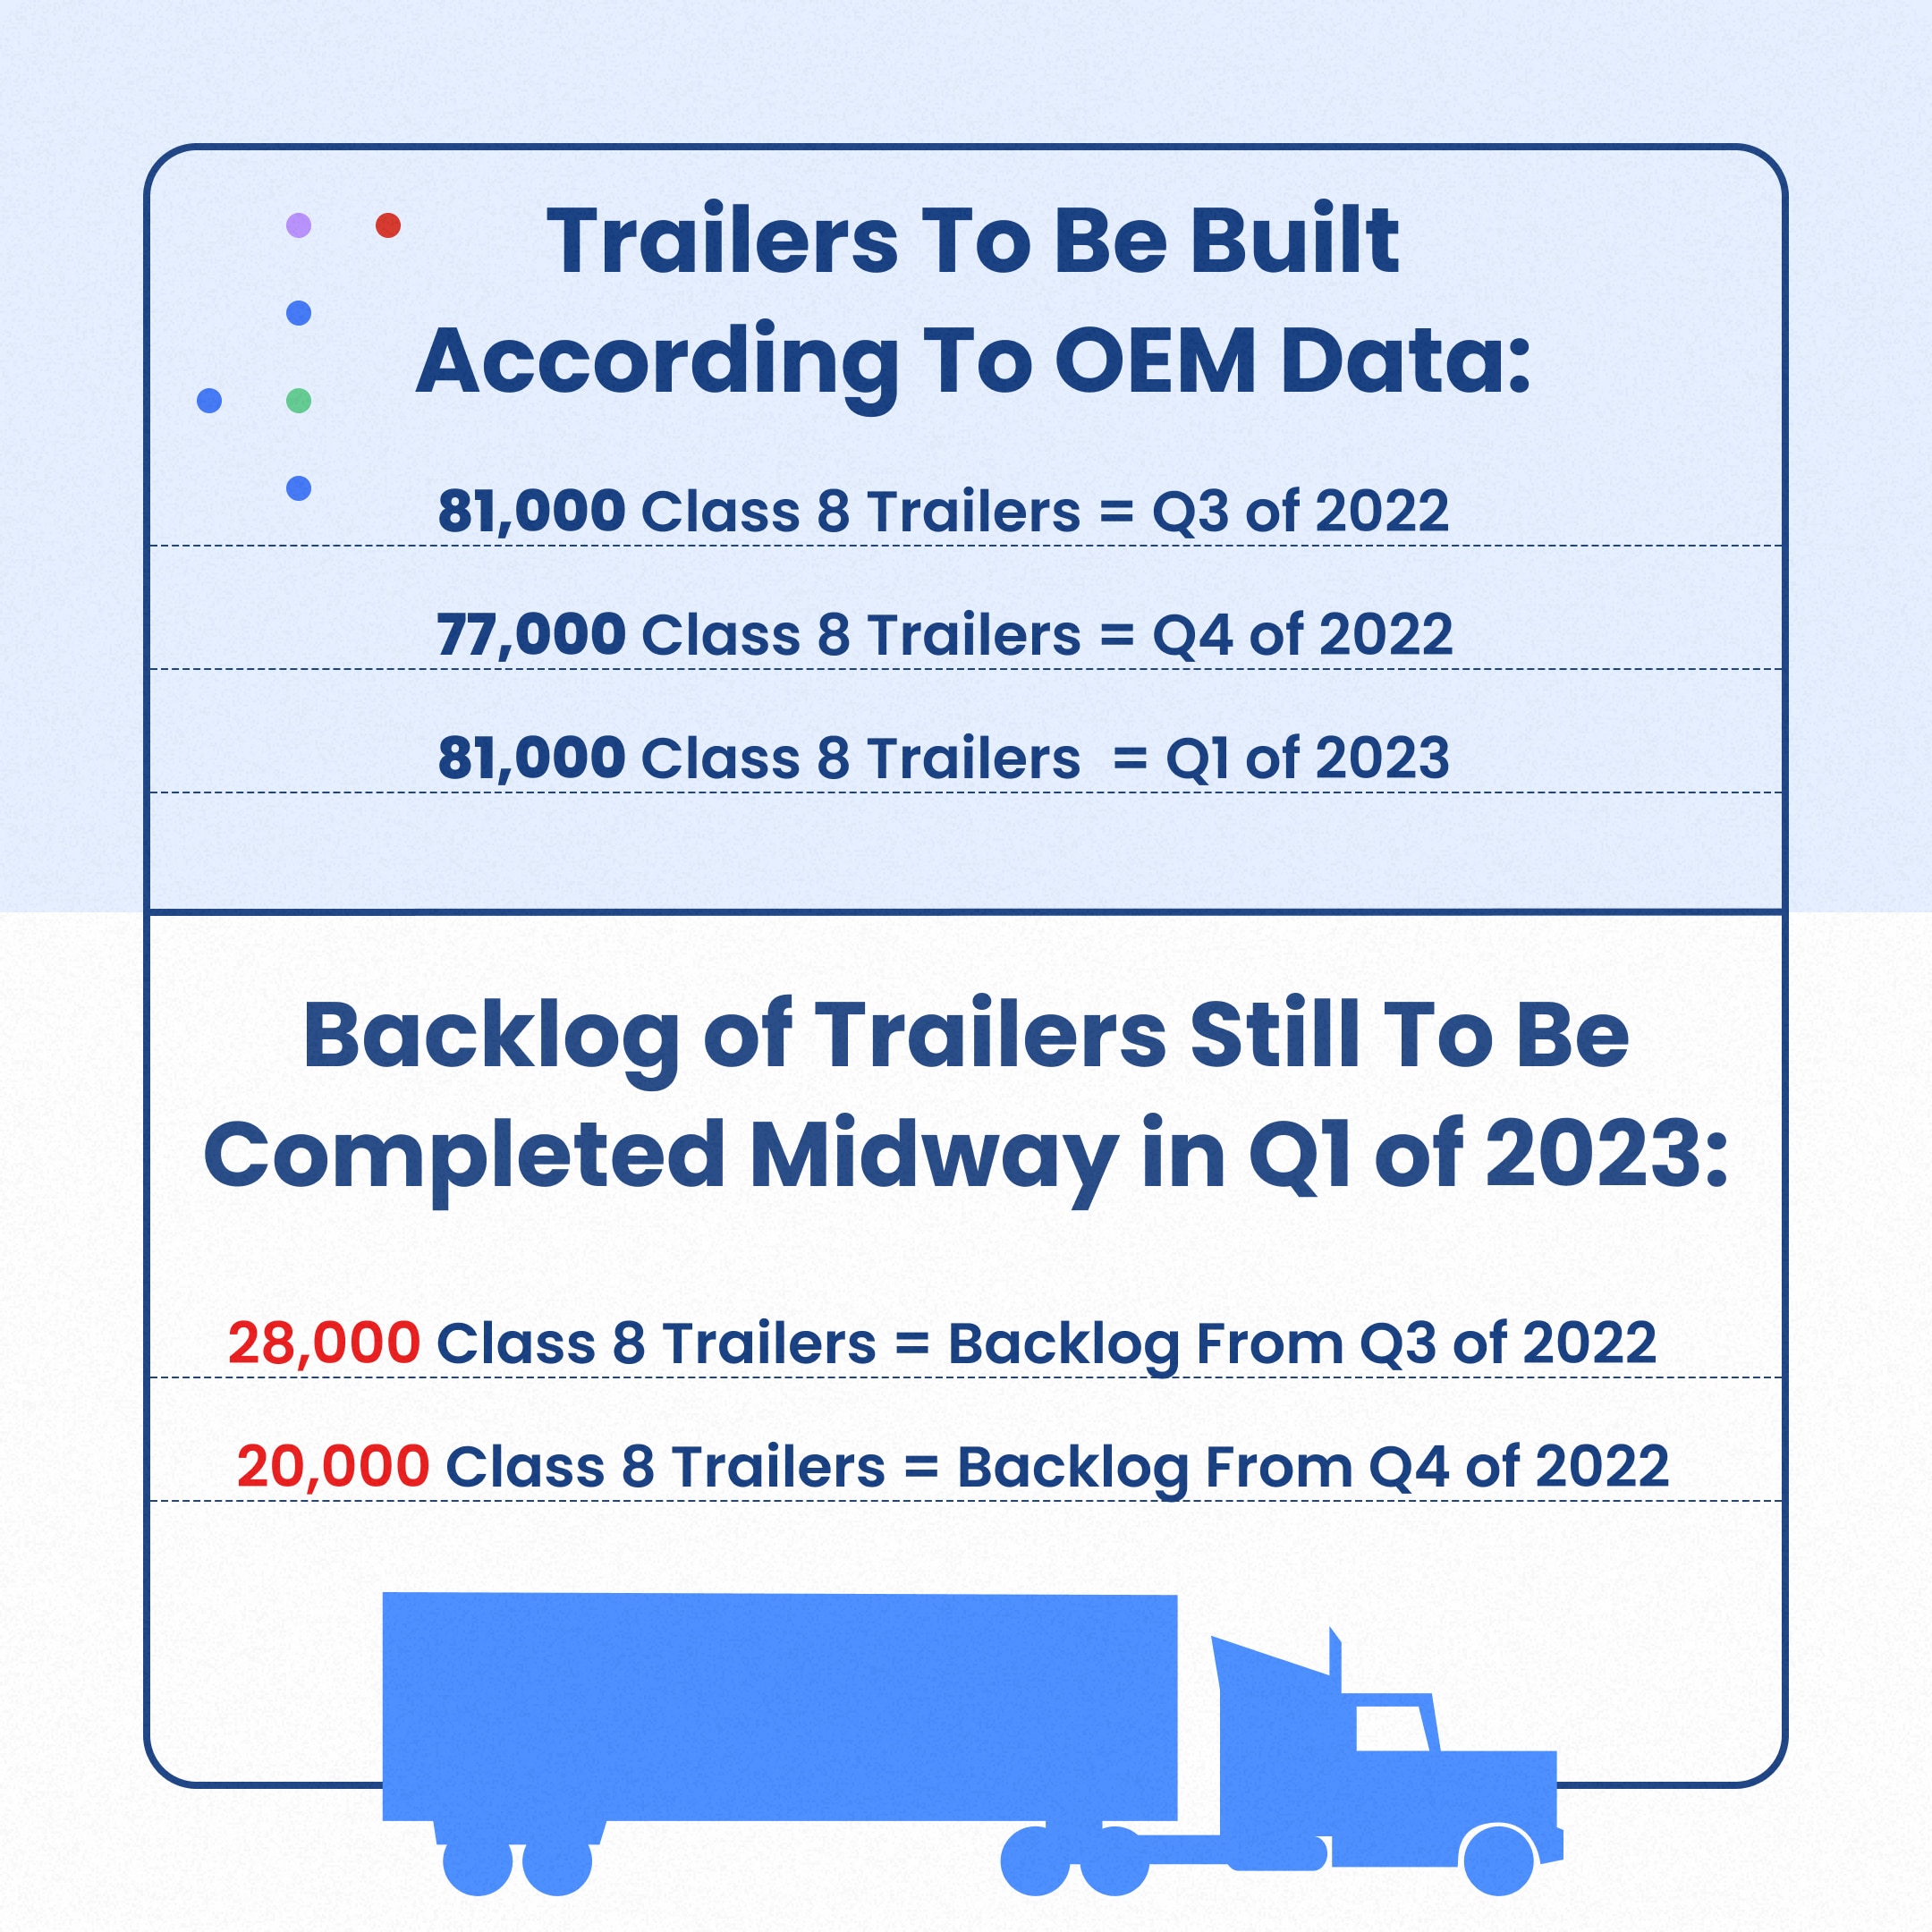 According to OEM data, truckmakers intended to build 81,000 Class 8 trailers in the 3rd quarter of 2022, 77,000 in the 4th quarter, and 81,000 in the first quarter of 2023. However, there are an additional 28,000 orders in the Q3 backlog and another 20,000 in the Q4 backlog.